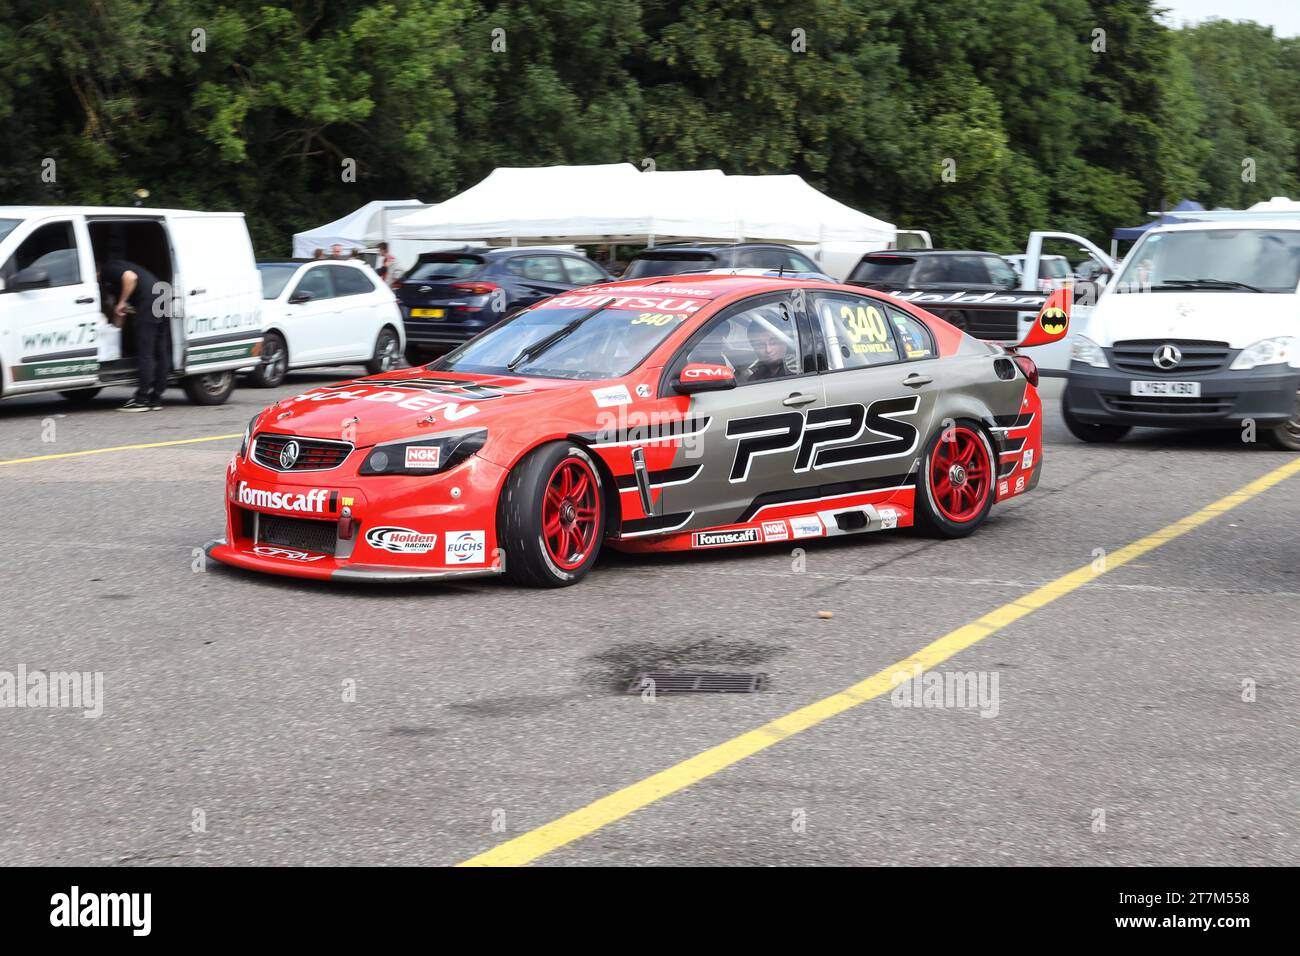 2006 Holden Commodore ssv race car at Bernie's V8 & Historic Outlaws car racing at Brands Hatch - 8th July 2023 Stock Photo